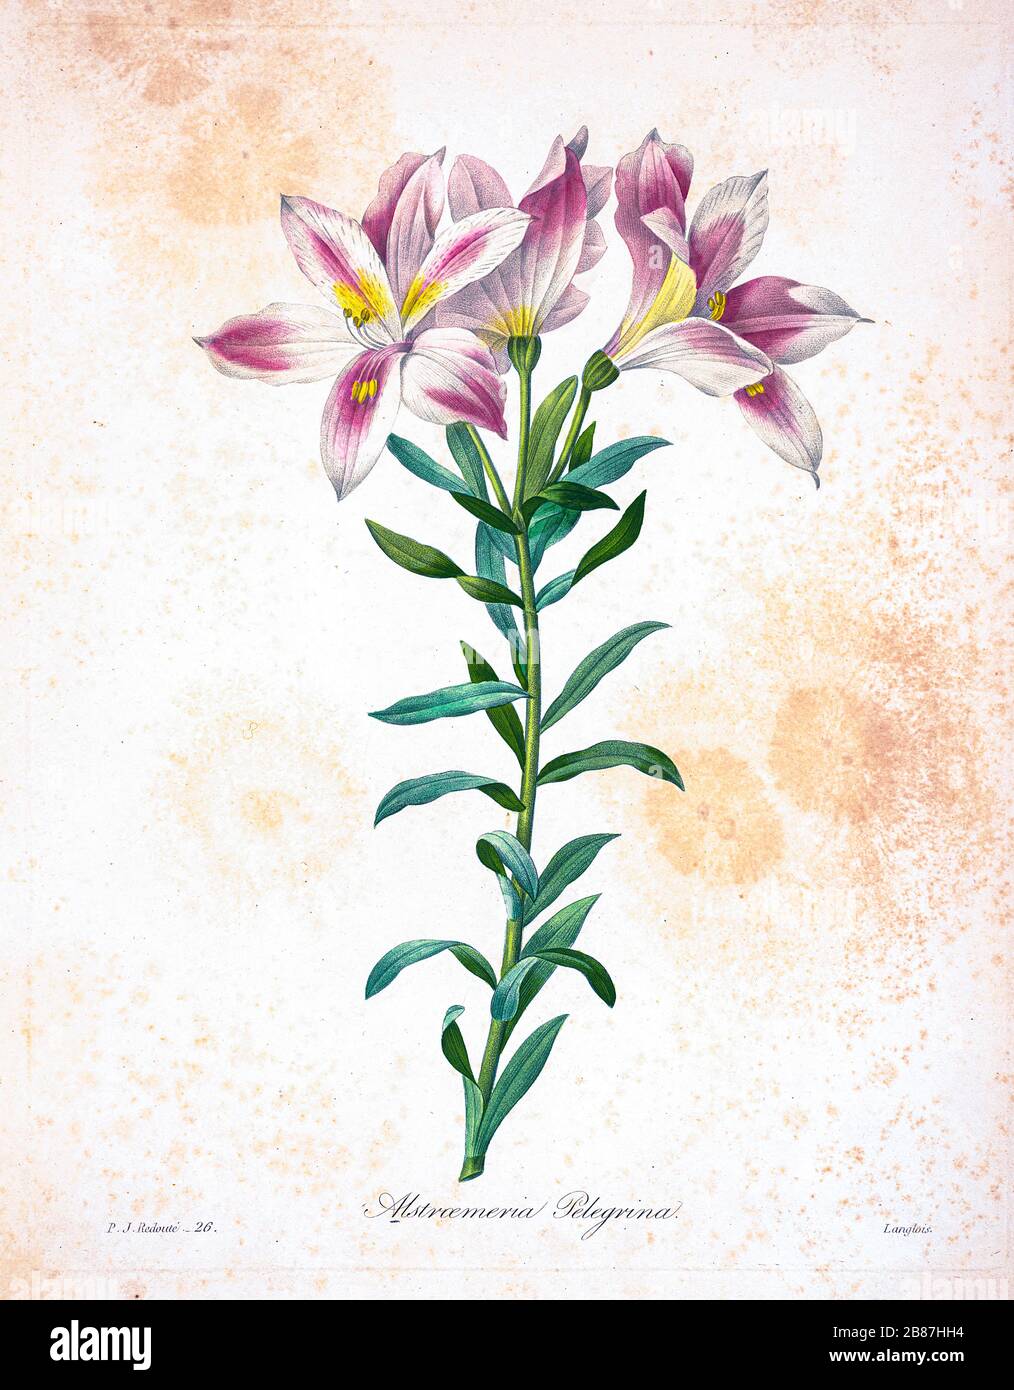 19th-century hand painted Engraving illustration of of an alstroemeria pelegrina, AKA Peruvian lily or lily of the Incas flower, by Pierre-Joseph Redoute. Published in Choix Des Plus Belles Fleurs, Paris (1827). by Redouté, Pierre Joseph, 1759-1840.; Chapuis, Jean Baptiste.; Ernest Panckoucke.; Langois, Dr.; Bessin, R.; Victor, fl. ca. 1820-1850. Stock Photo